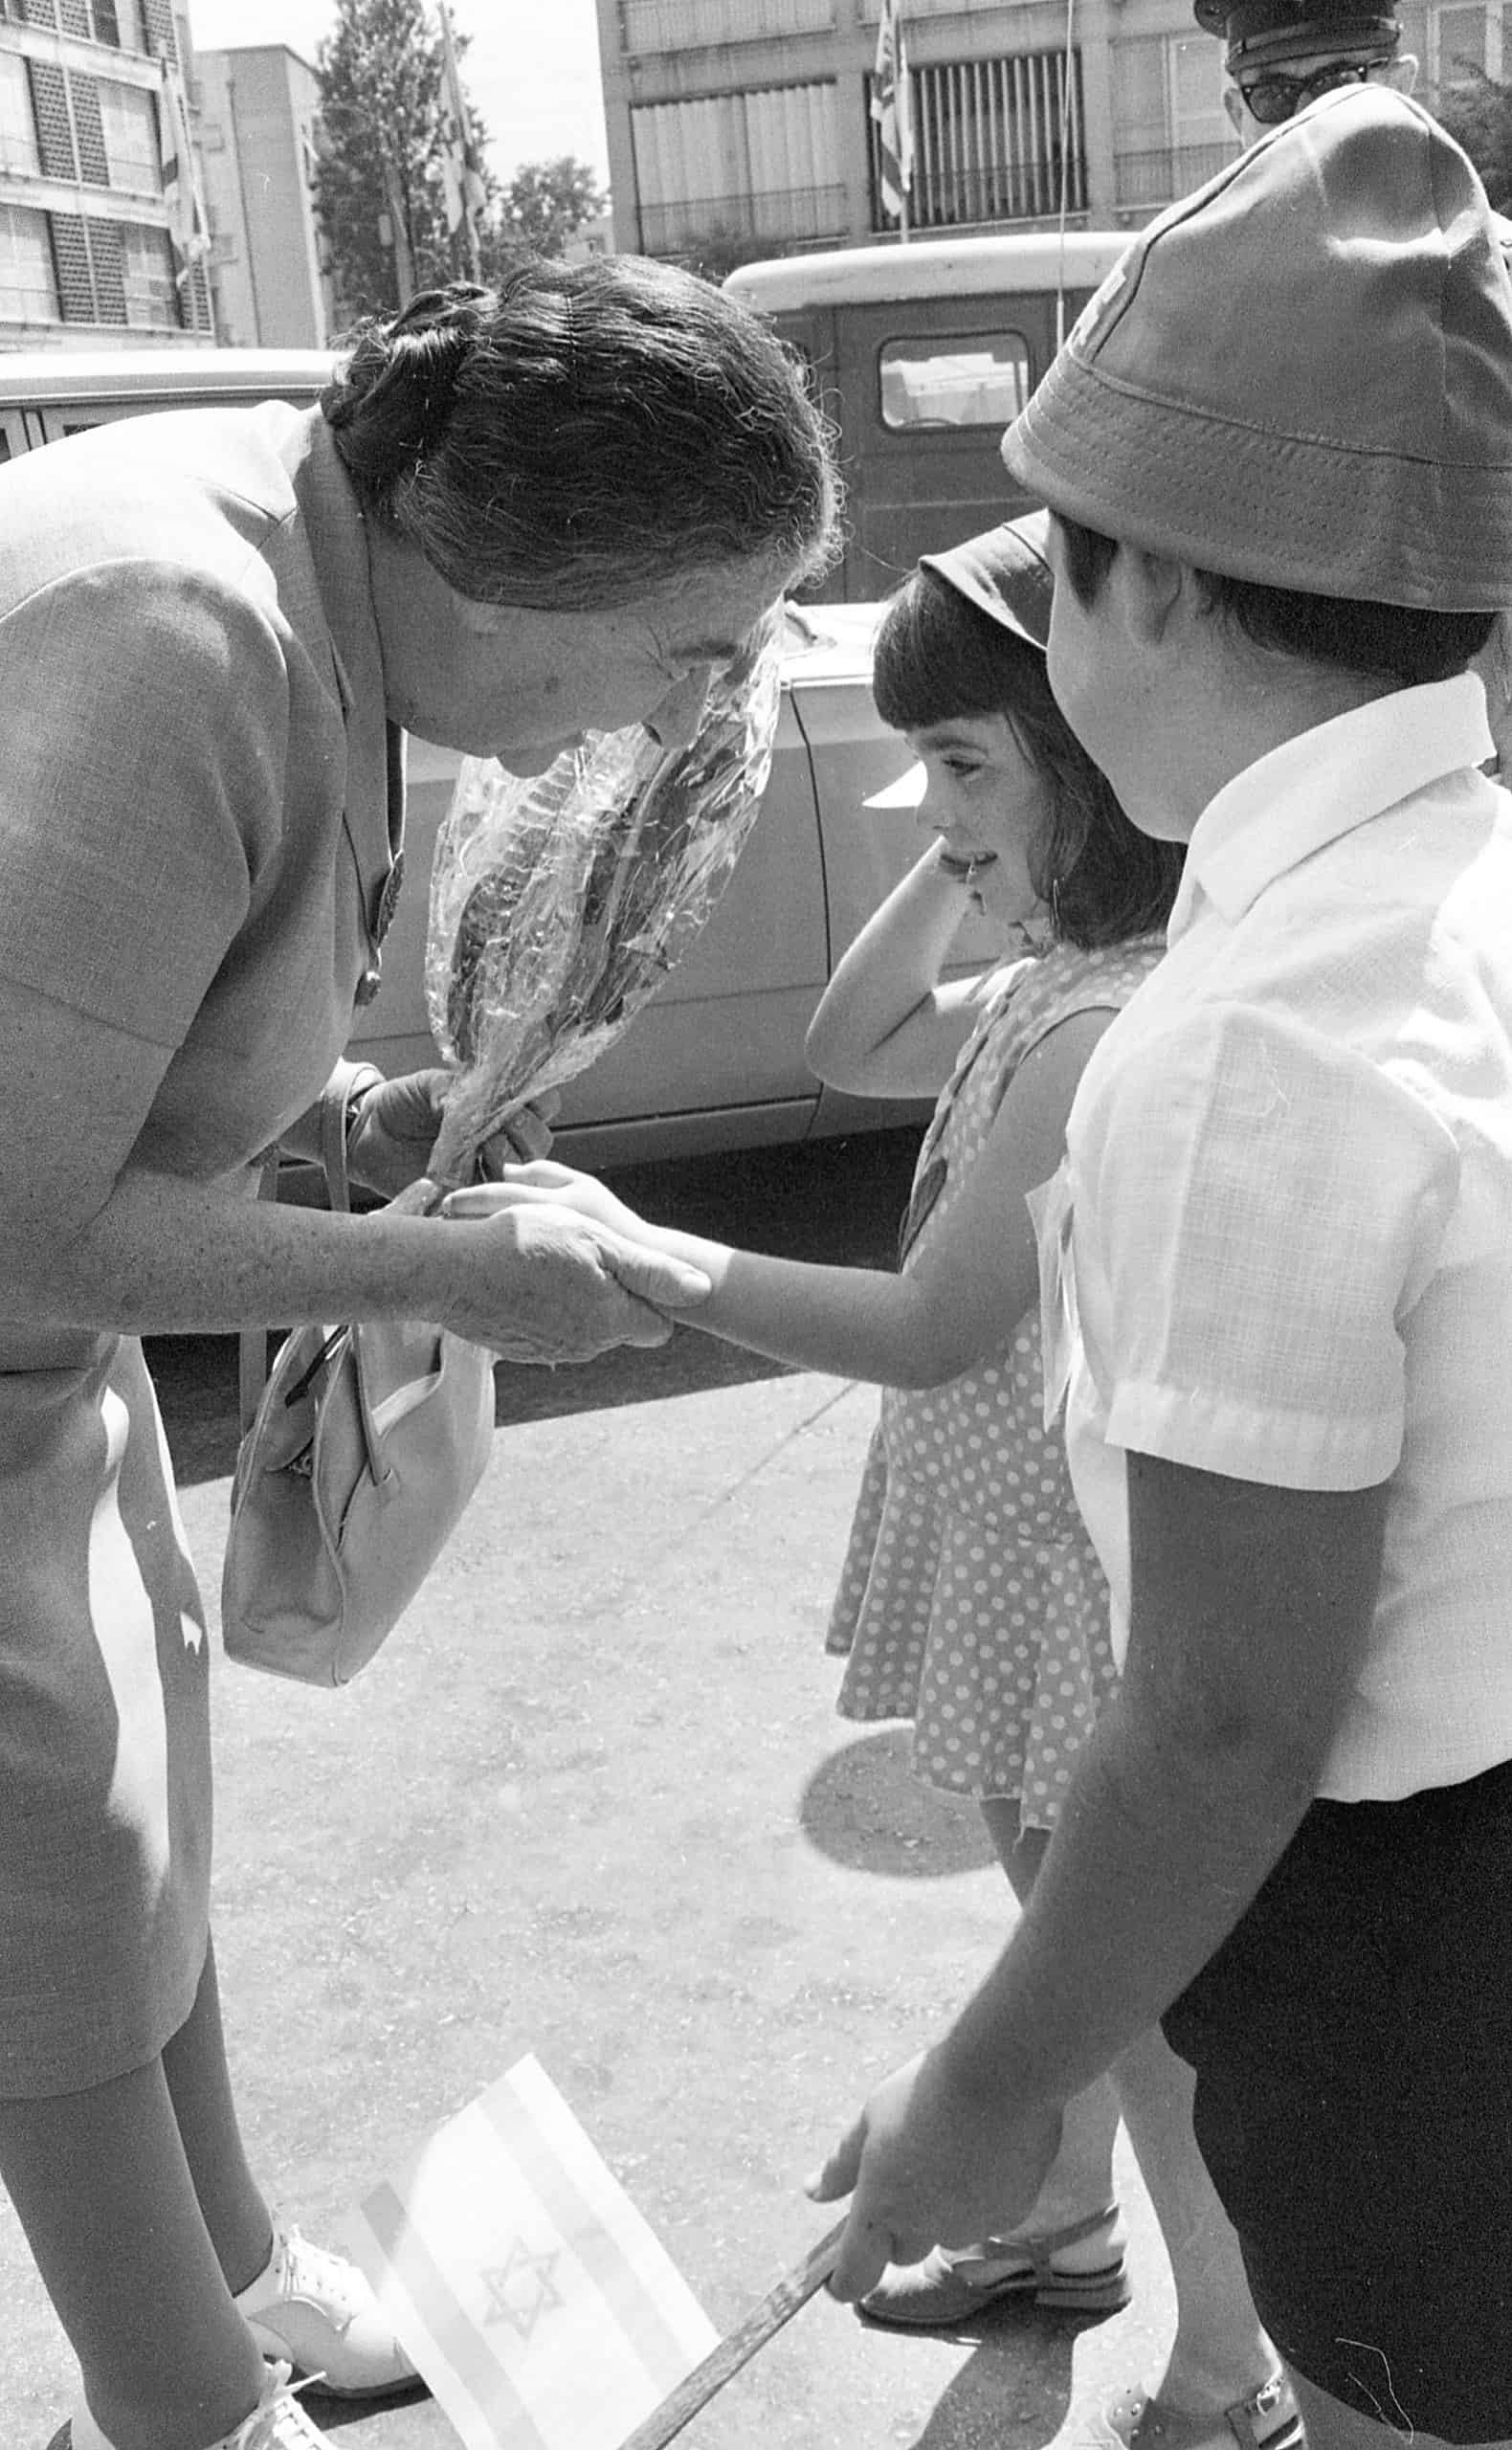 Israeli Prime Minister Golda Meir talks to children in Tel Aviv while visiting Tel Aviv City Hall on July 30, 1969. Credit: Israel Press and Photo Agency, Dan Hadani Collection/National Library of Israel via Wikimedia Commons.